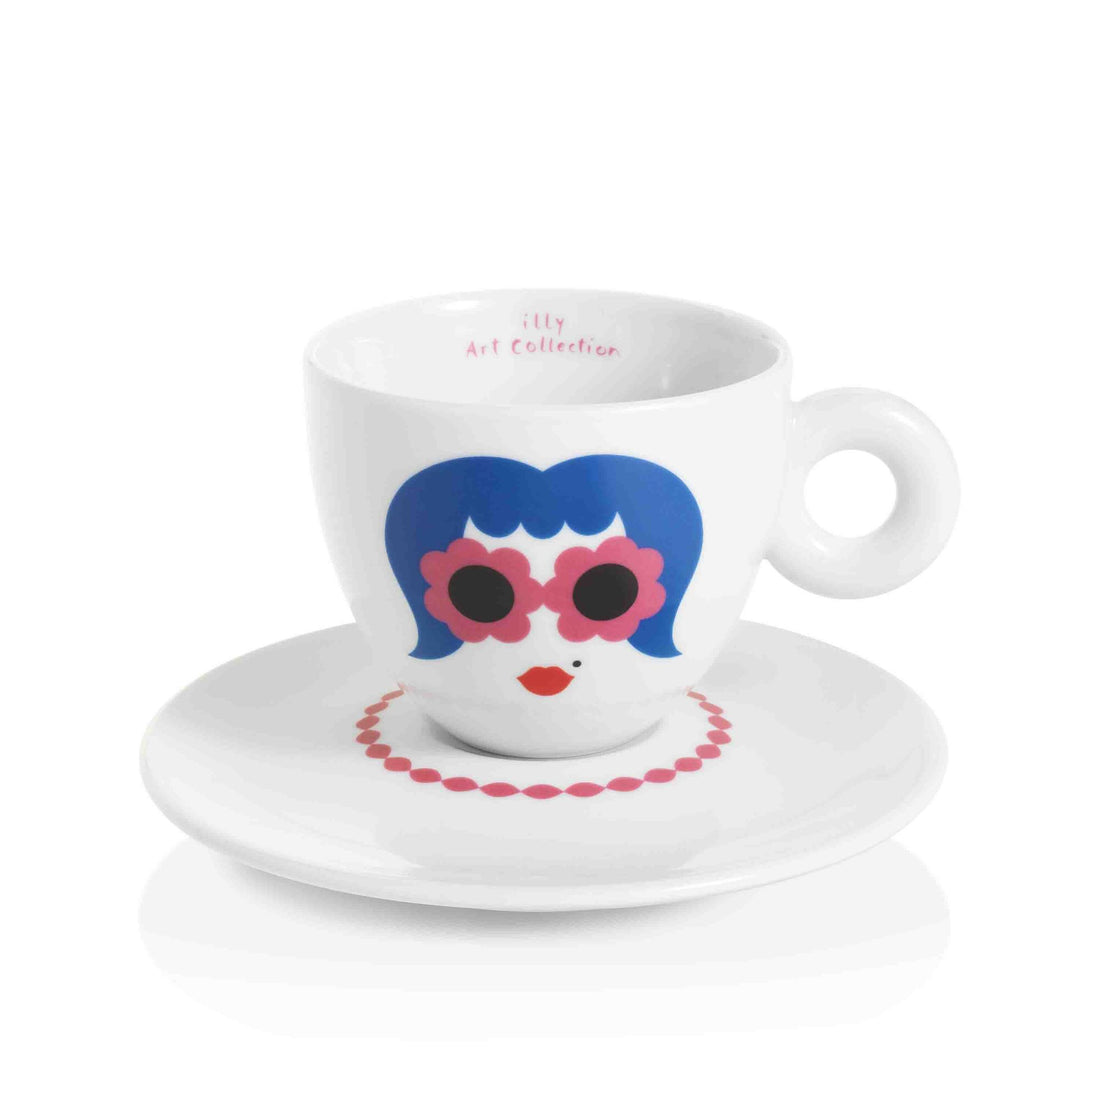 illy Art Collection Olimpia Zagnoli Cappuccino Cups - Set of 2